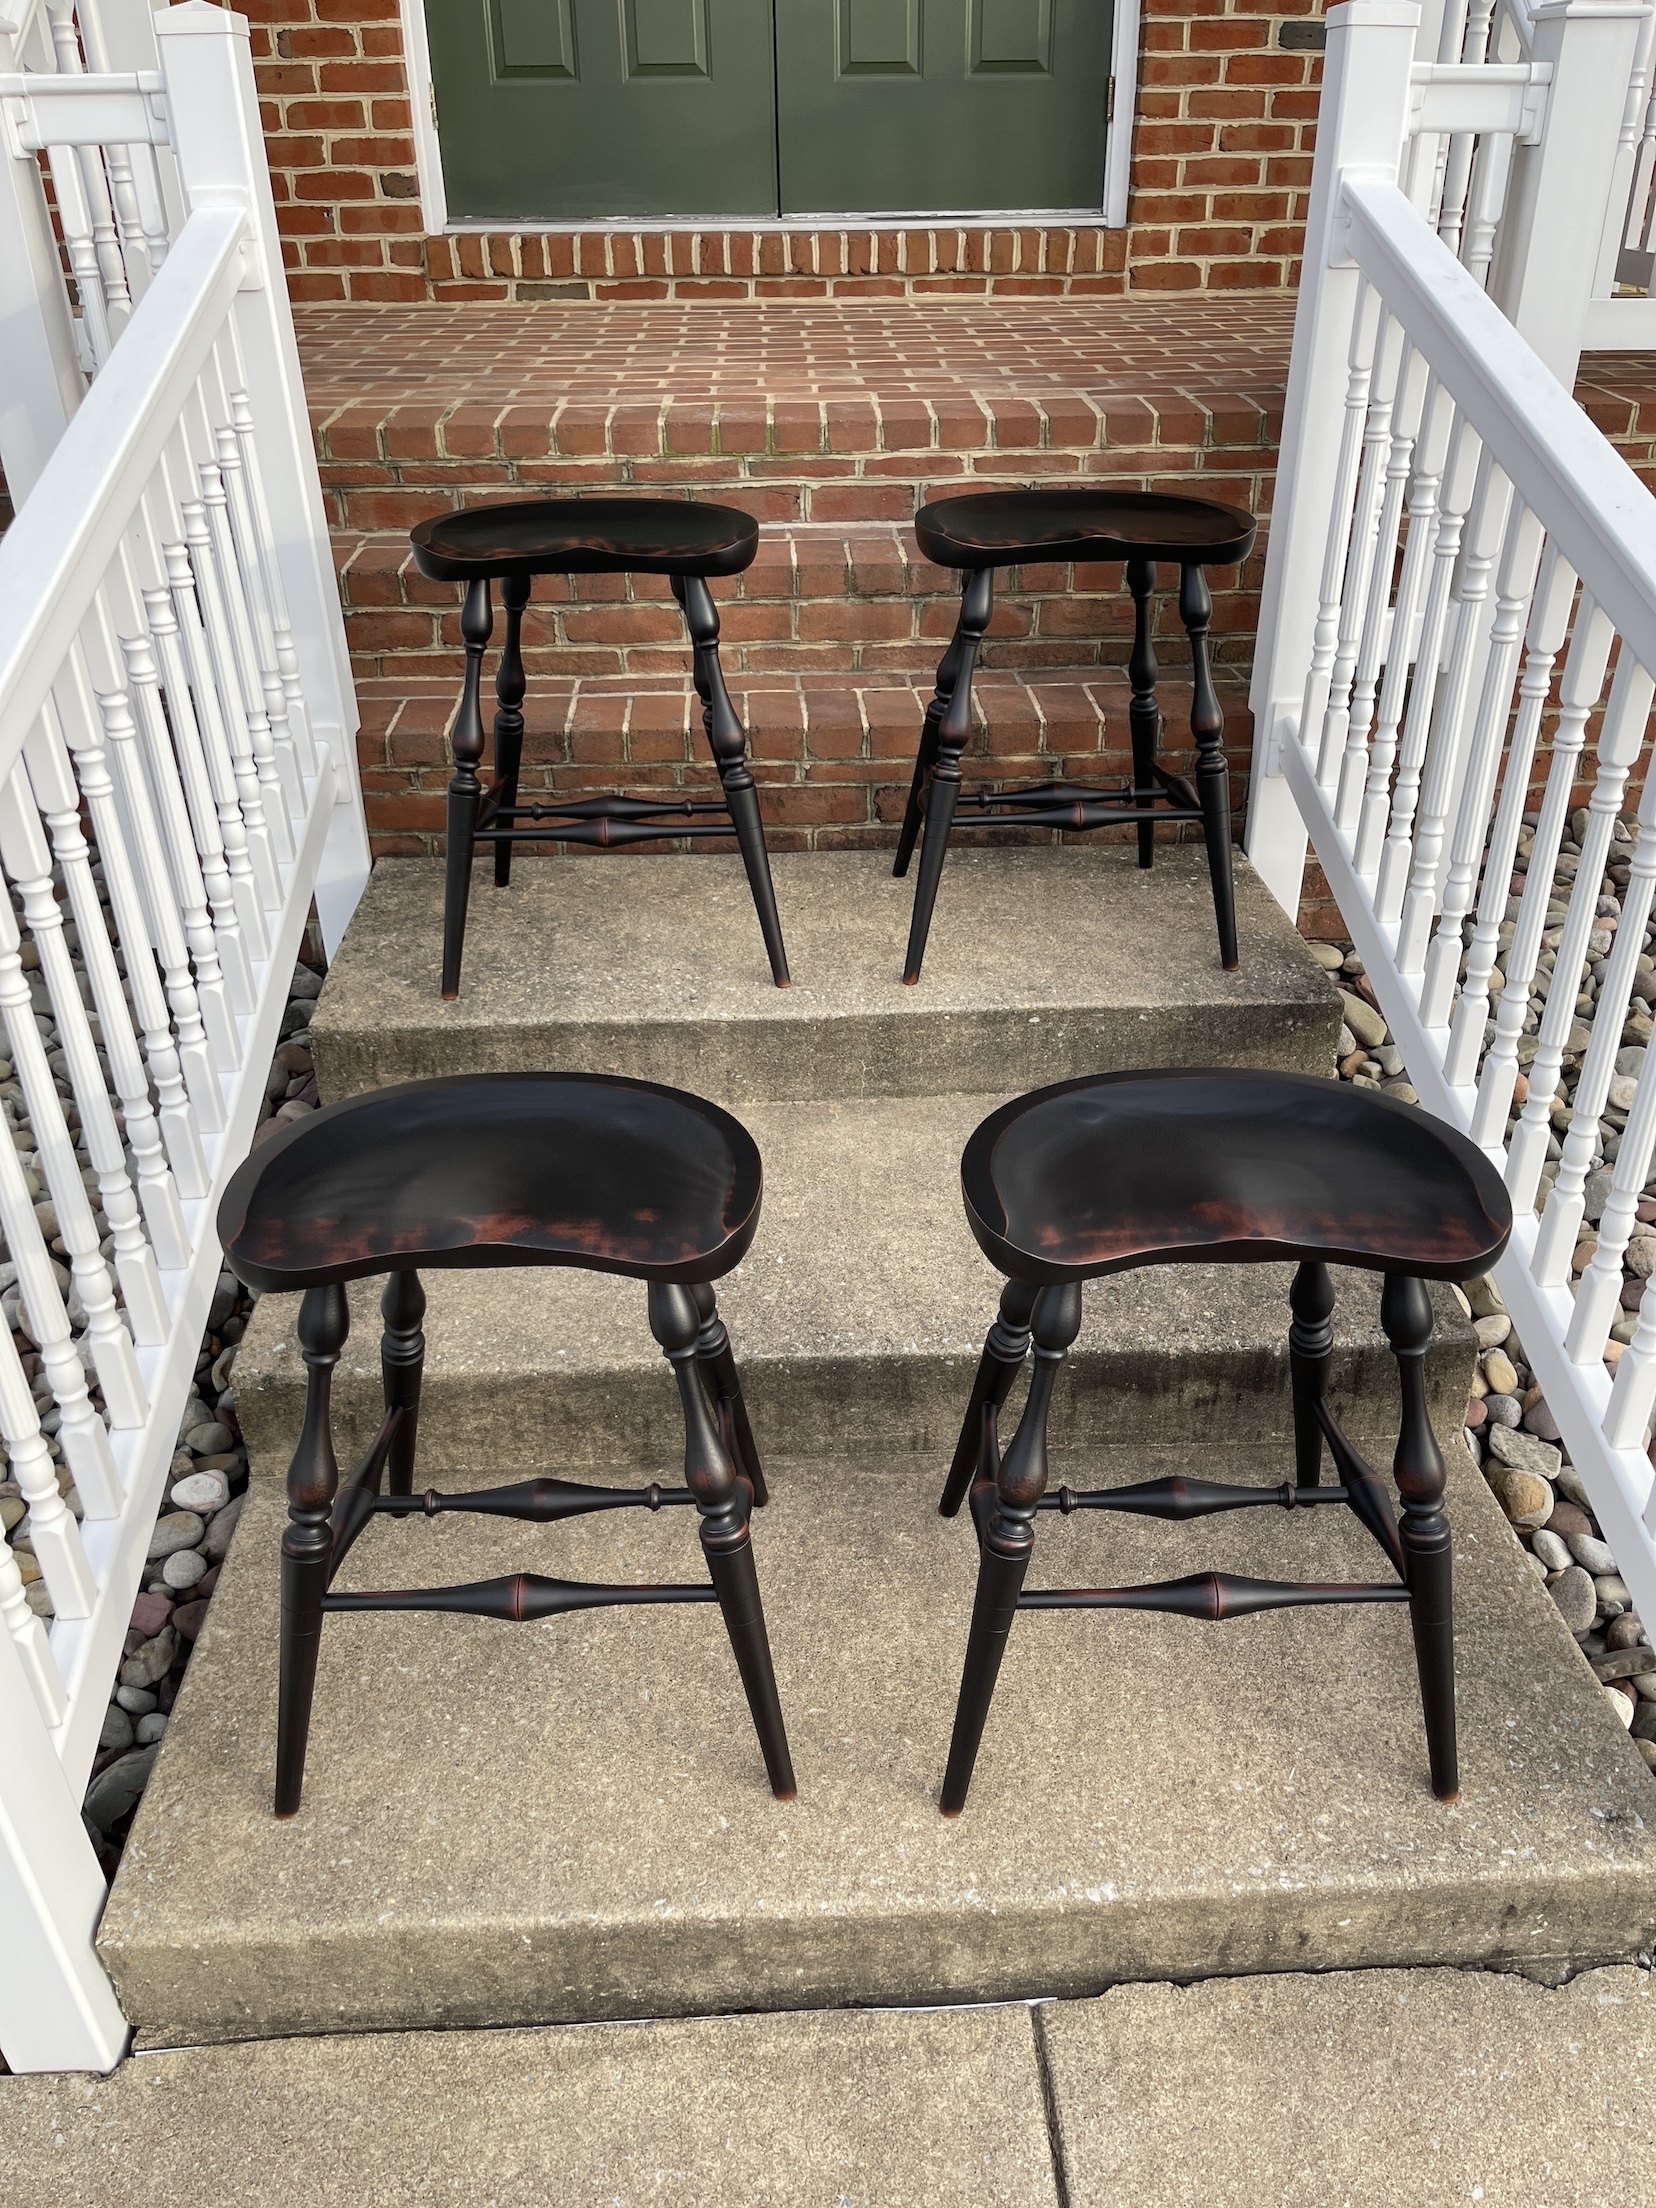 Four Backless Counter Stools Image